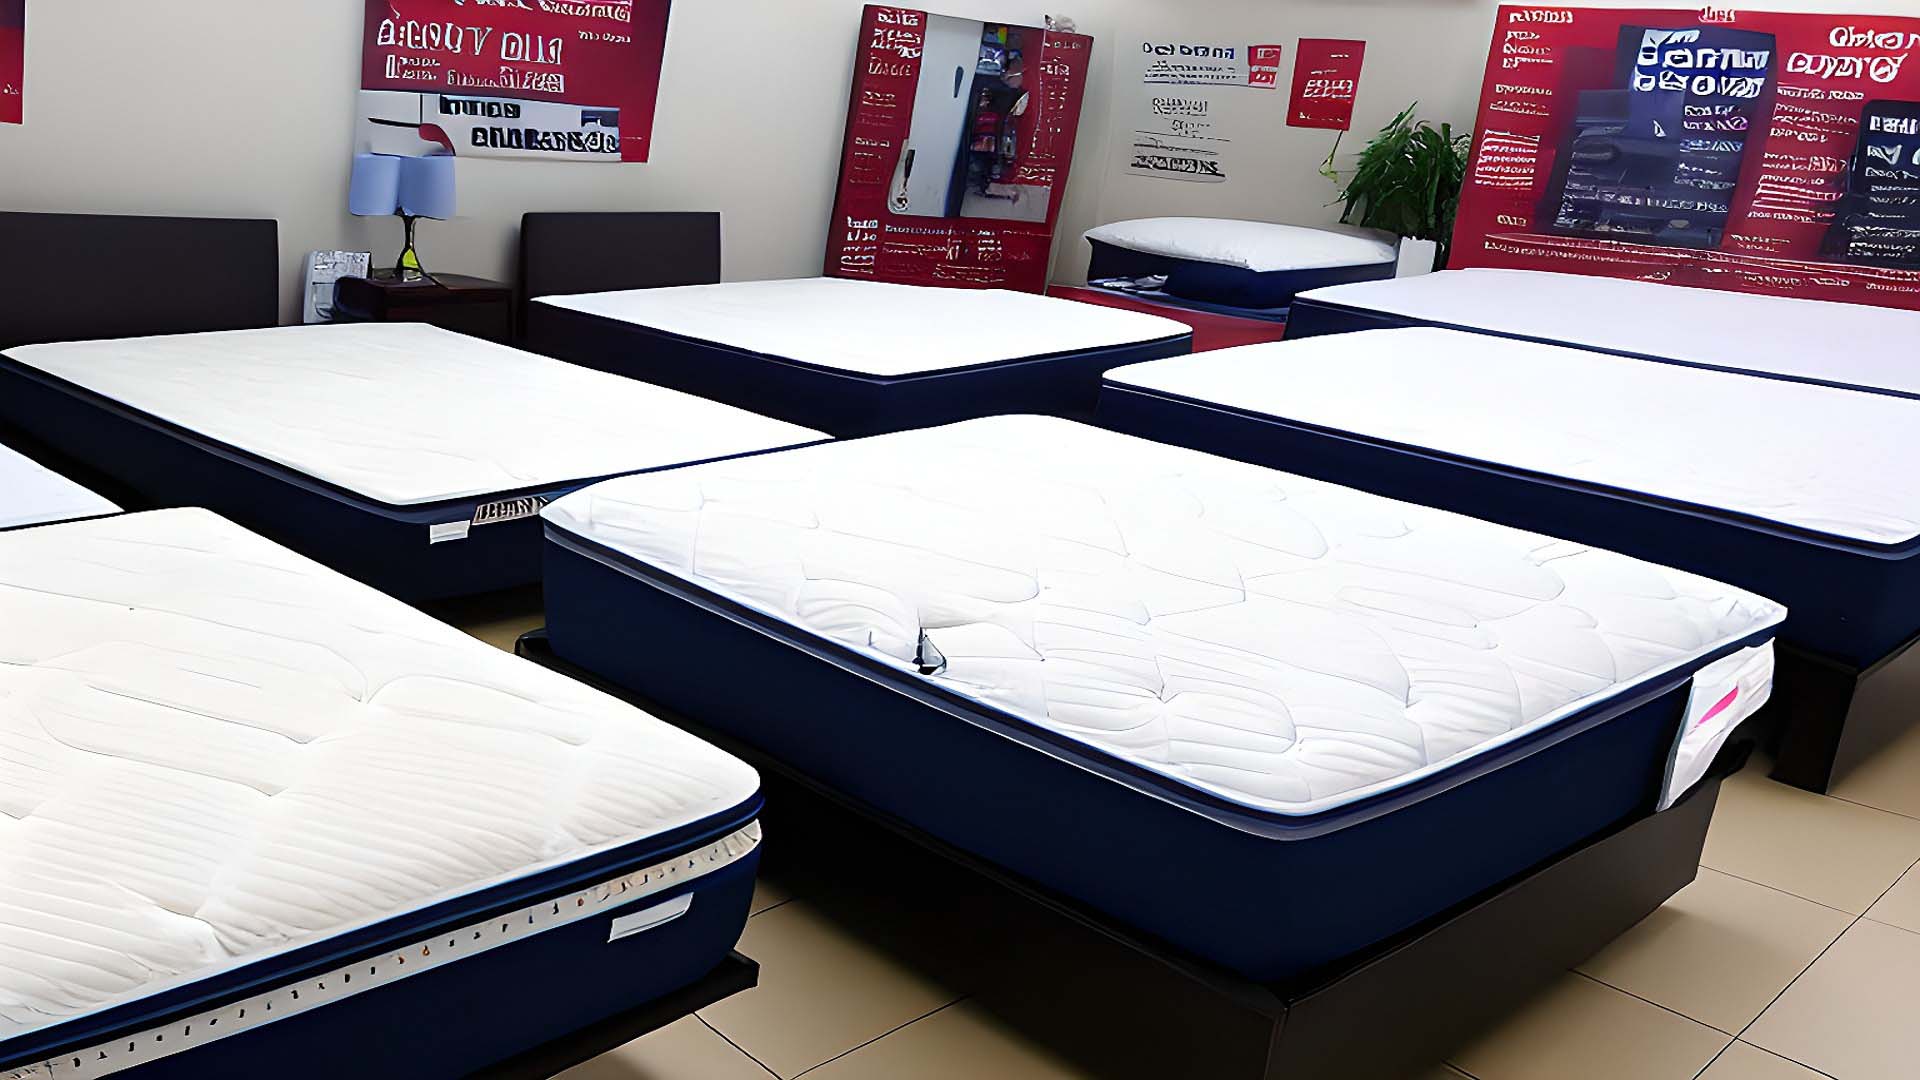 Mattress By Appointment in Farmington, New Mexico 87401